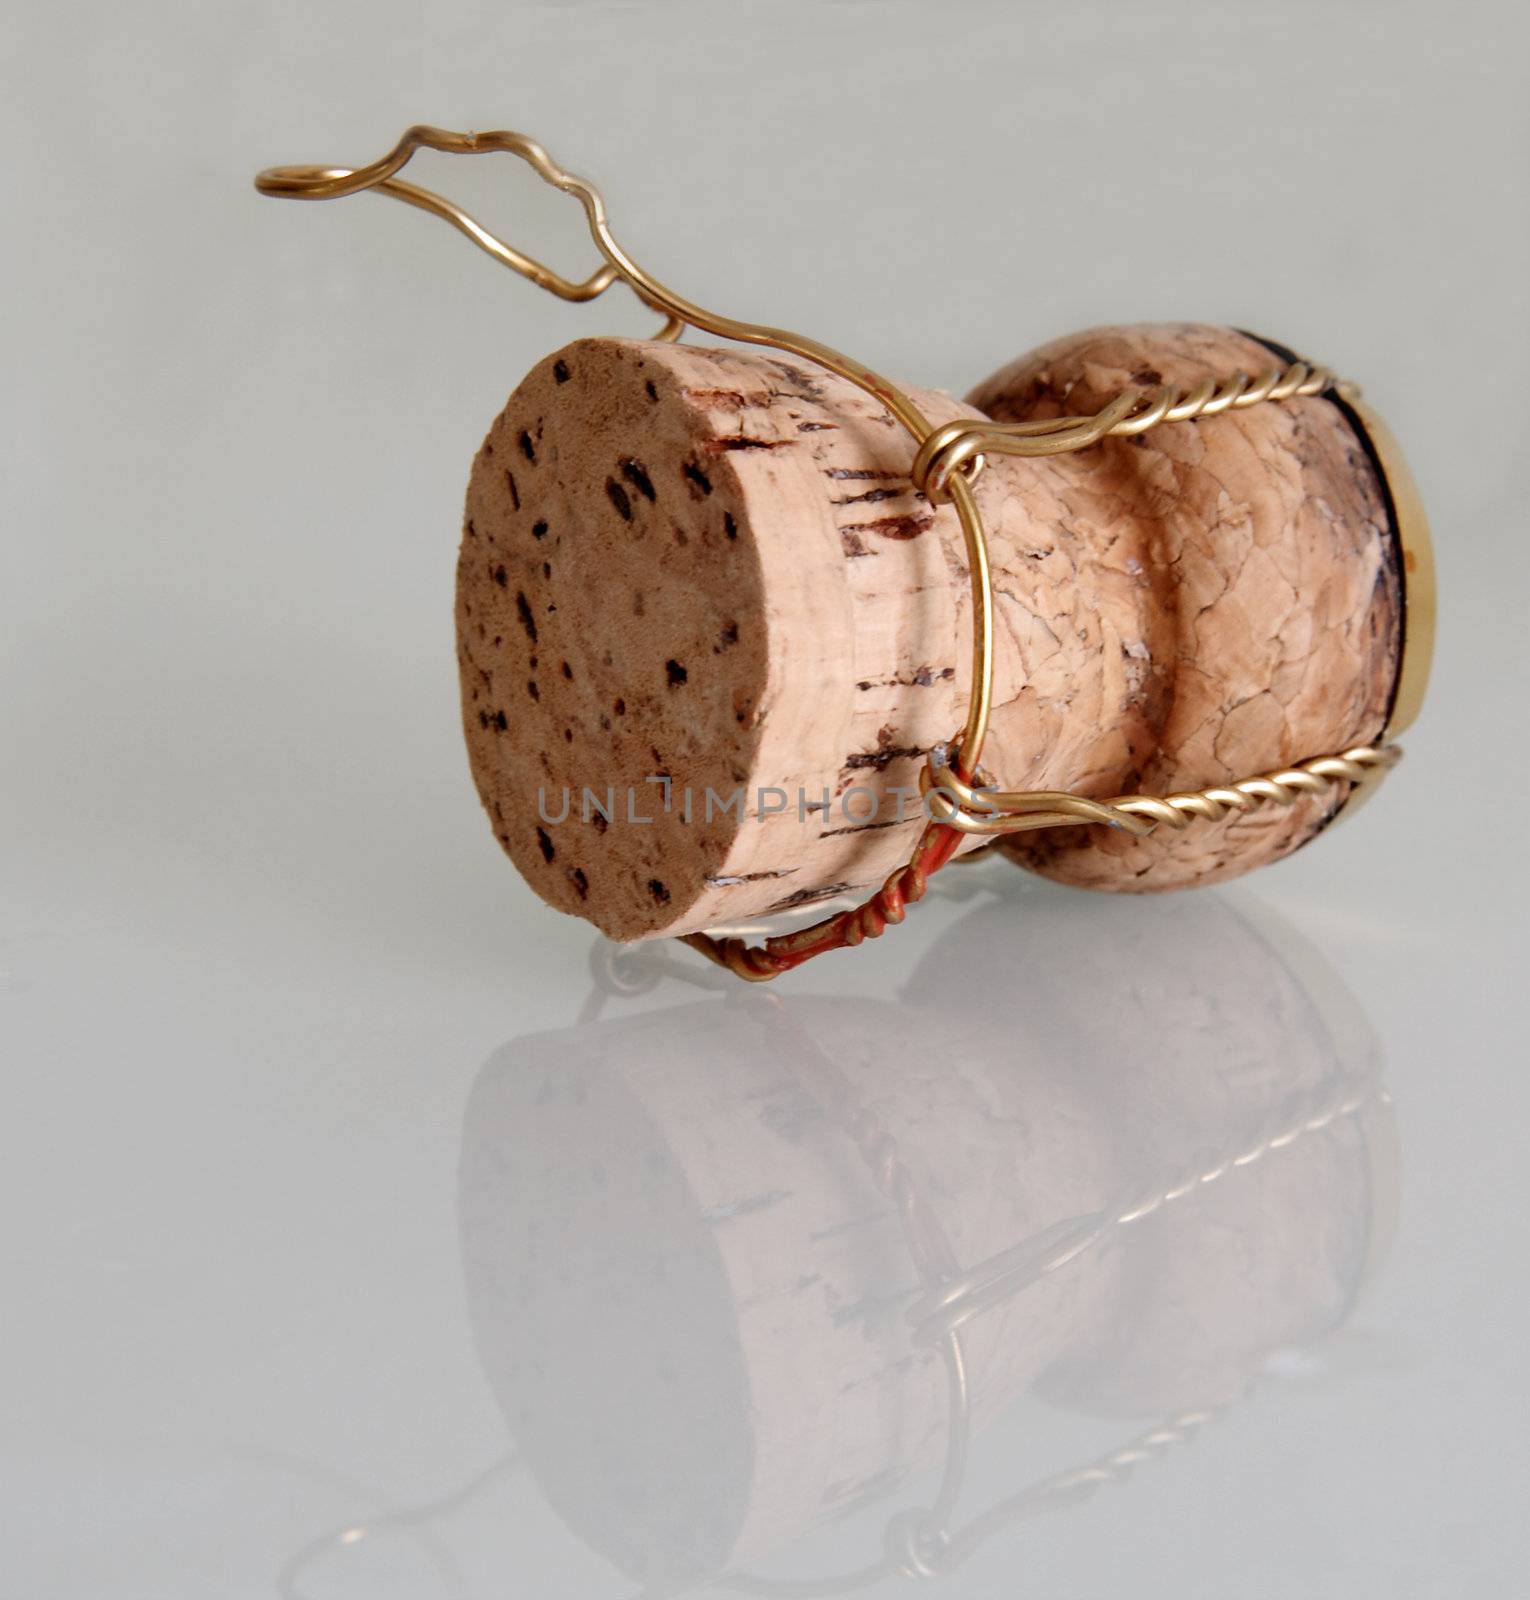 Champagne cork with reflection by serpl